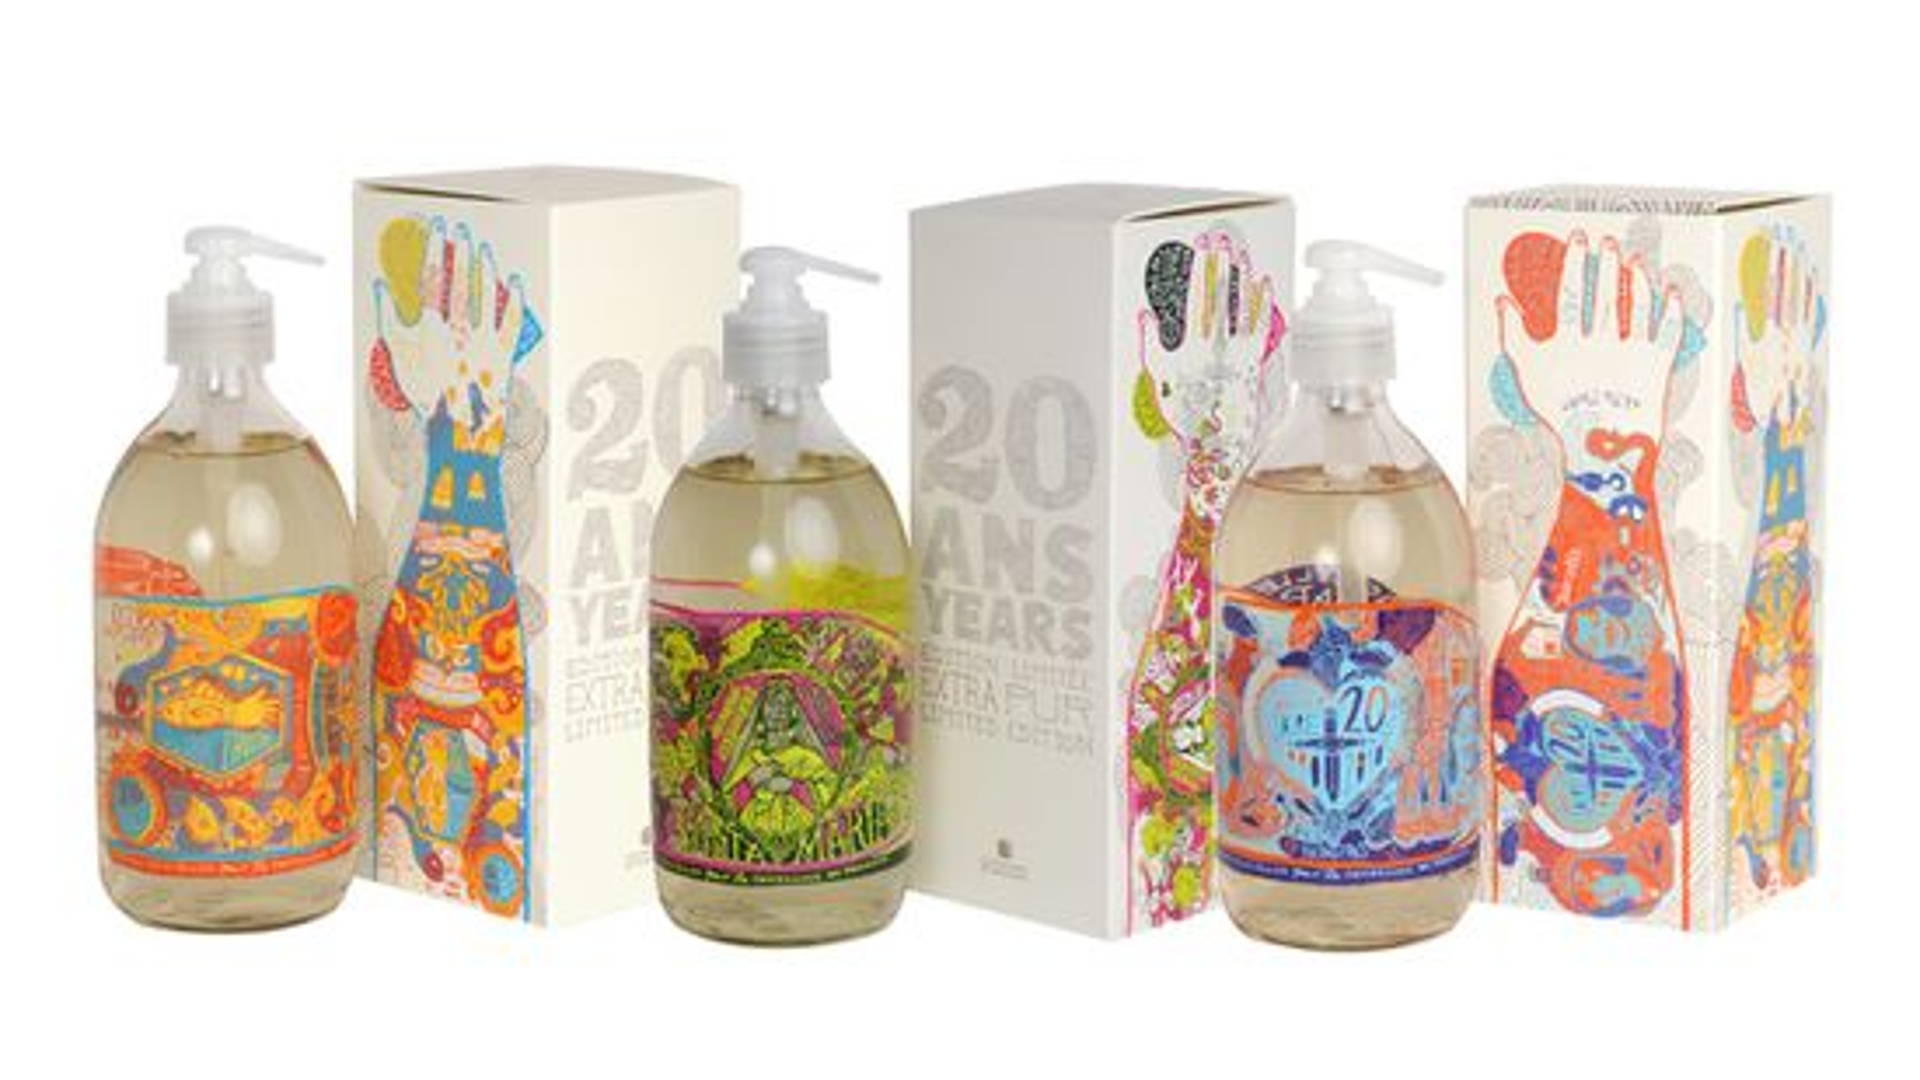 Featured image for Compagnie de Provence limited edition soaps by Stephen Muntaner